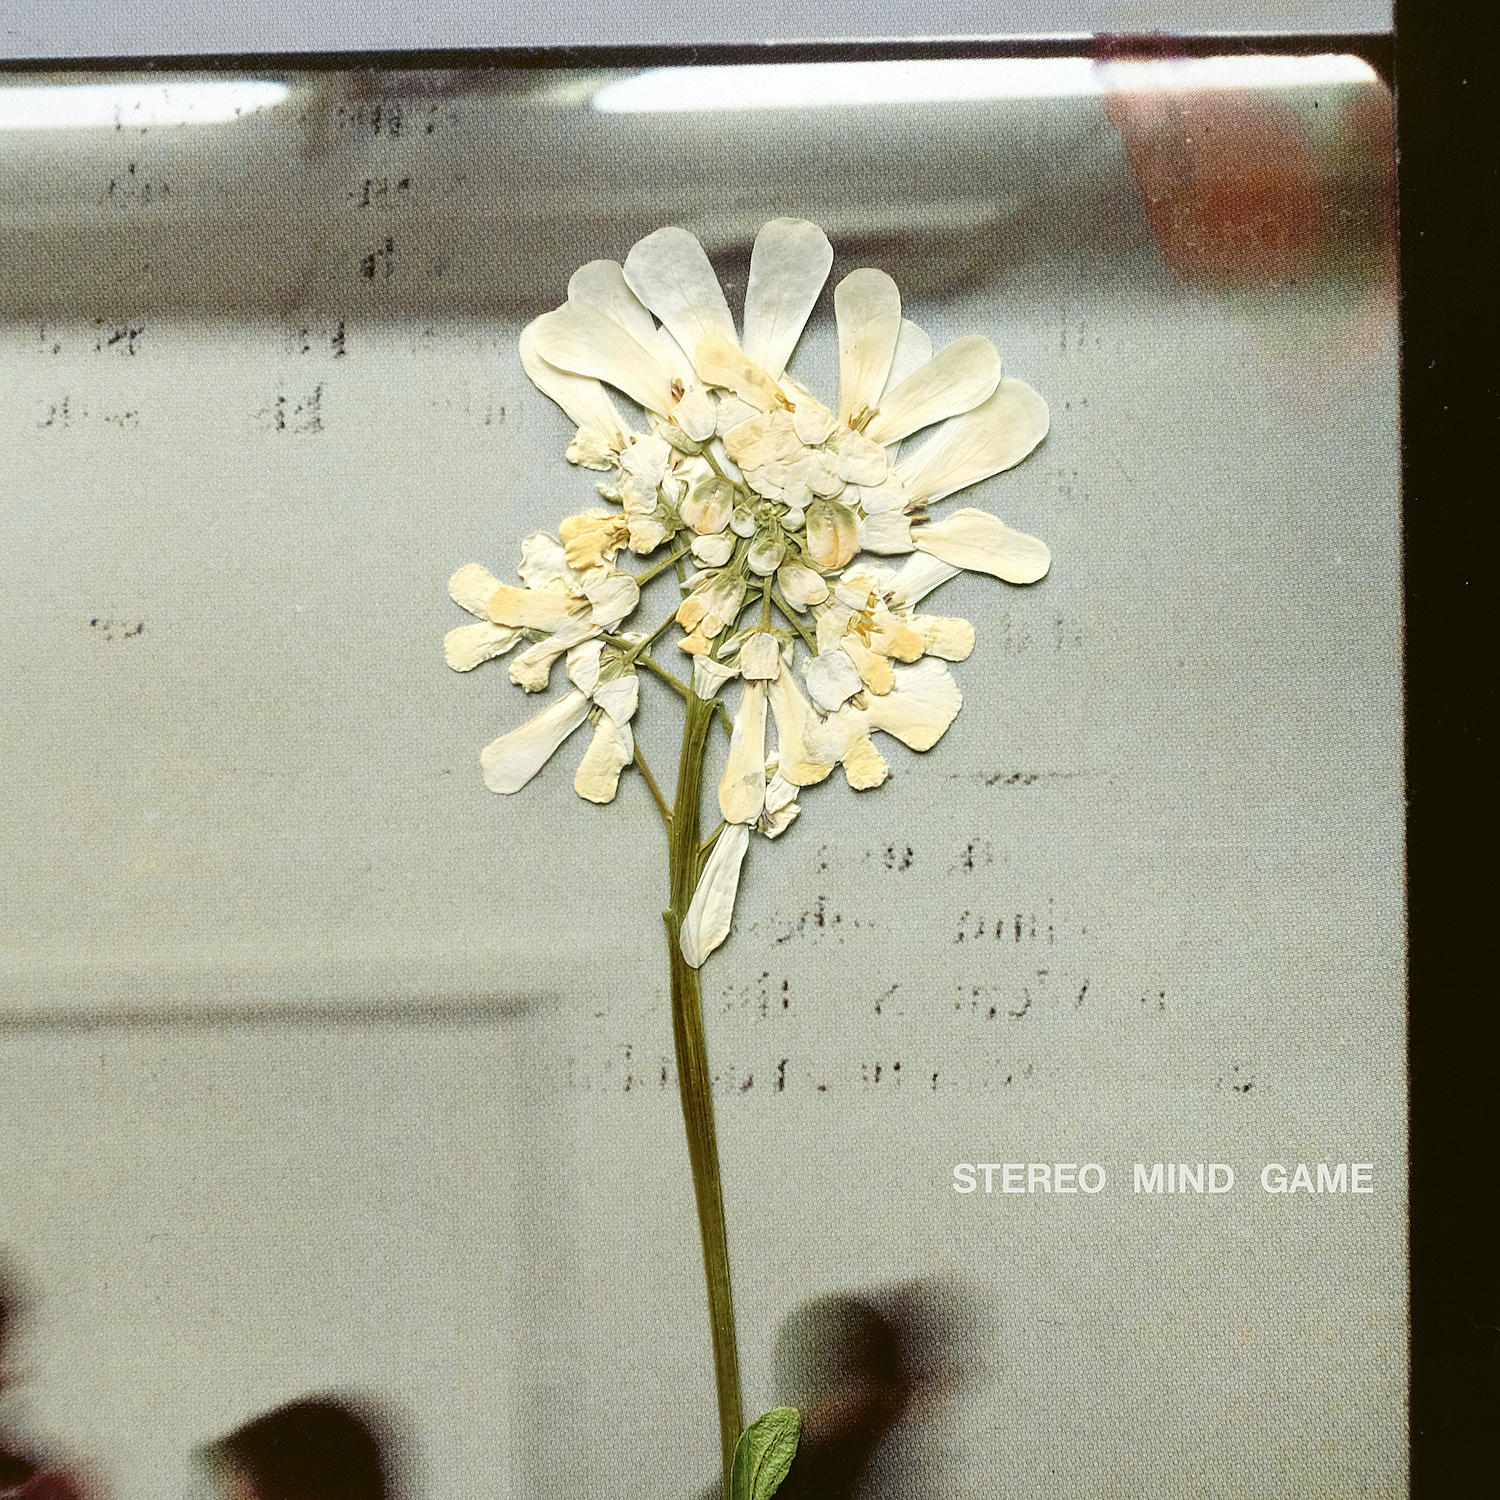 Artwork for the album ‘Stereo Mind Game’ by Daughter